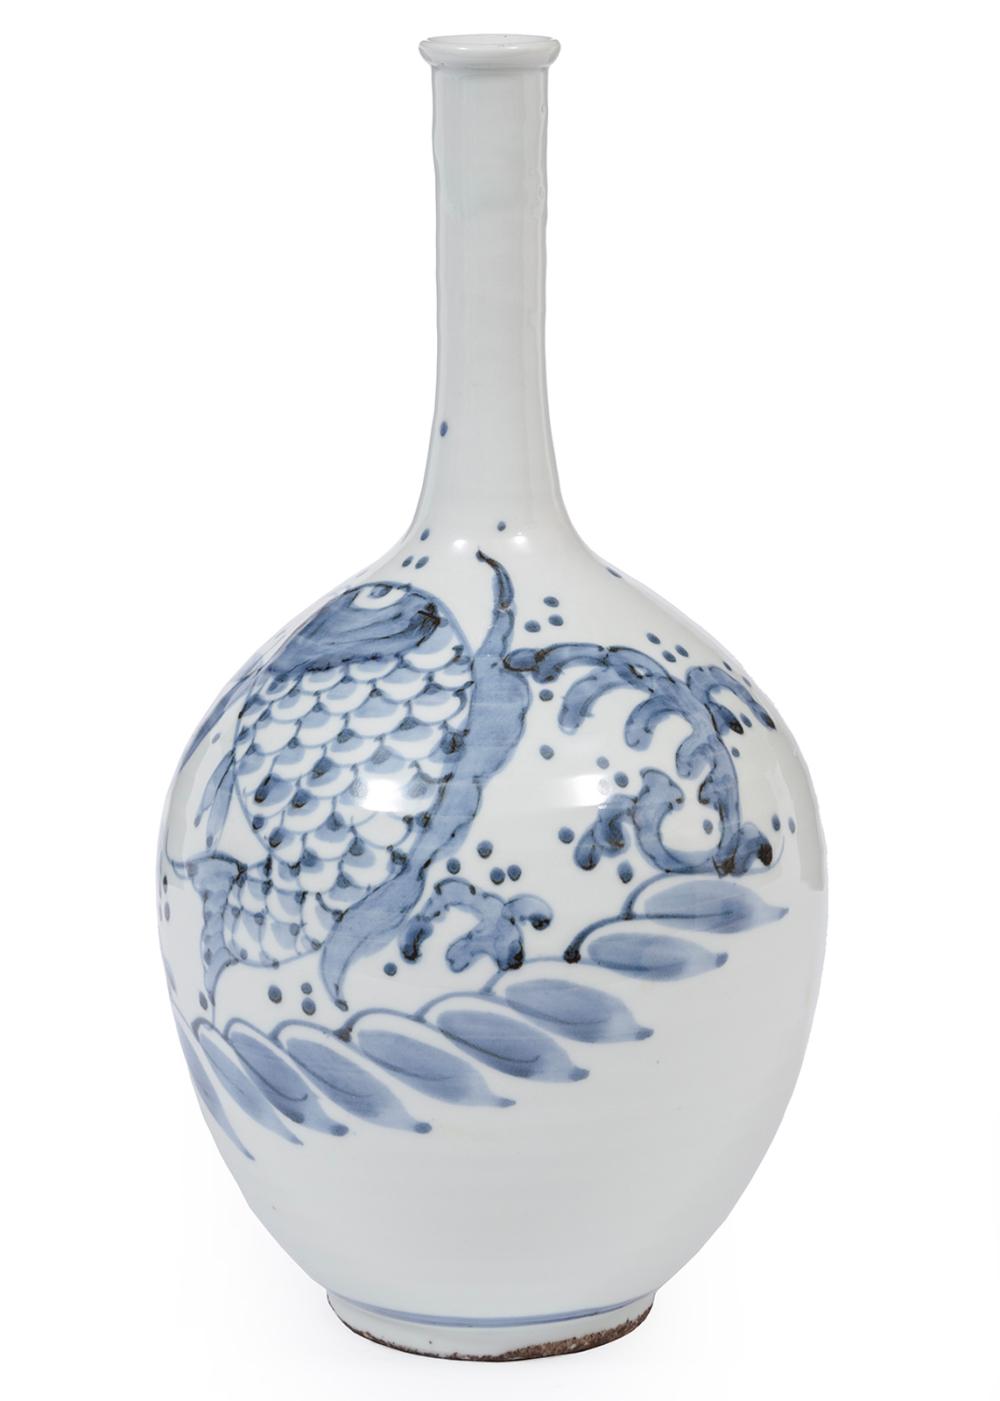 ASIAN BLUE AND WHITE PORCELAIN